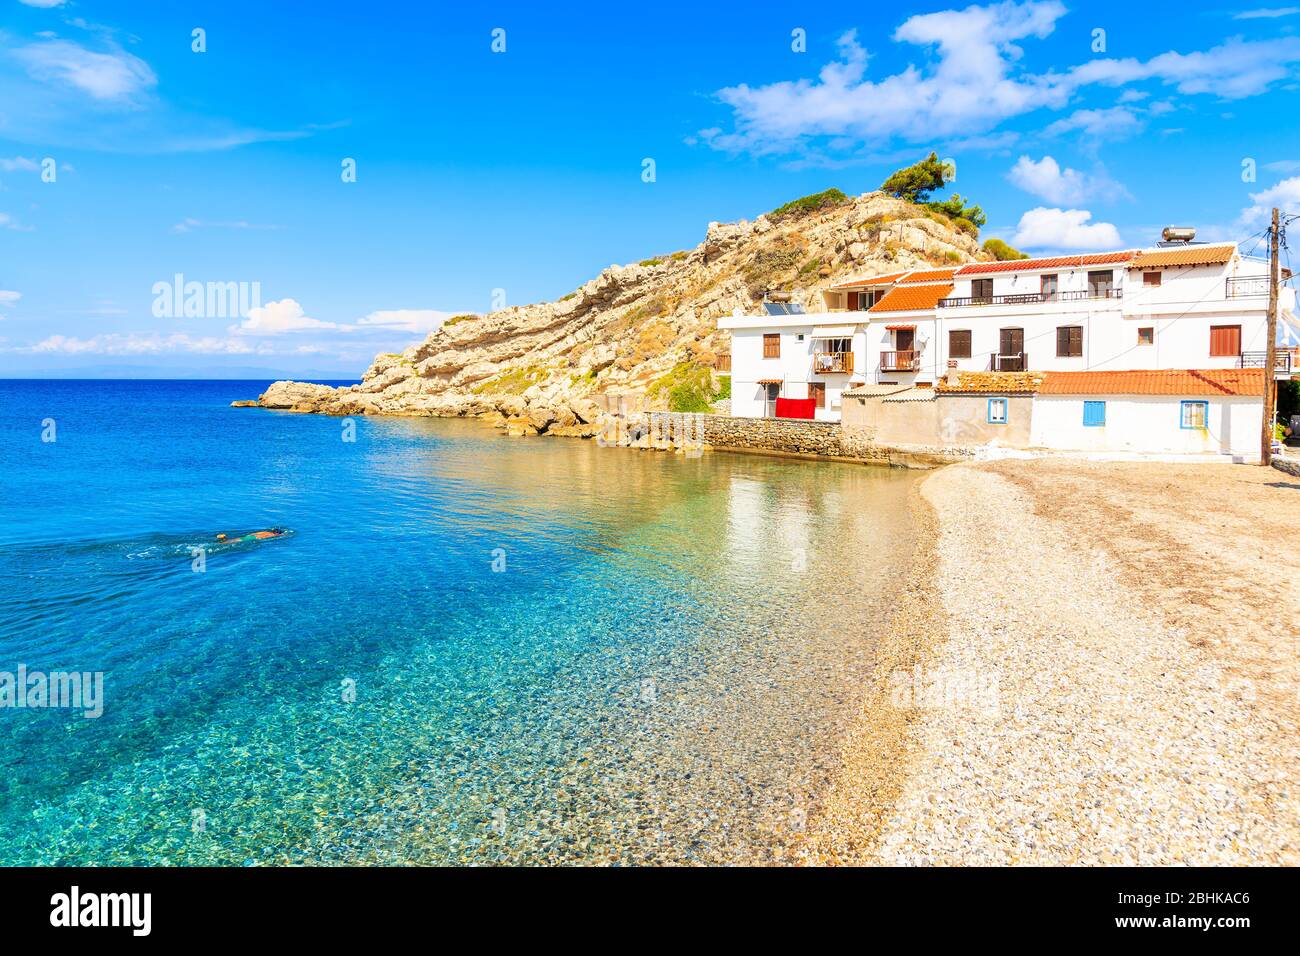 Snorkeler swimming in crystal clear azure sea water in Kokkari village with typical white houses on shore, Samos island, Aegean Sea, Greece Stock Photo